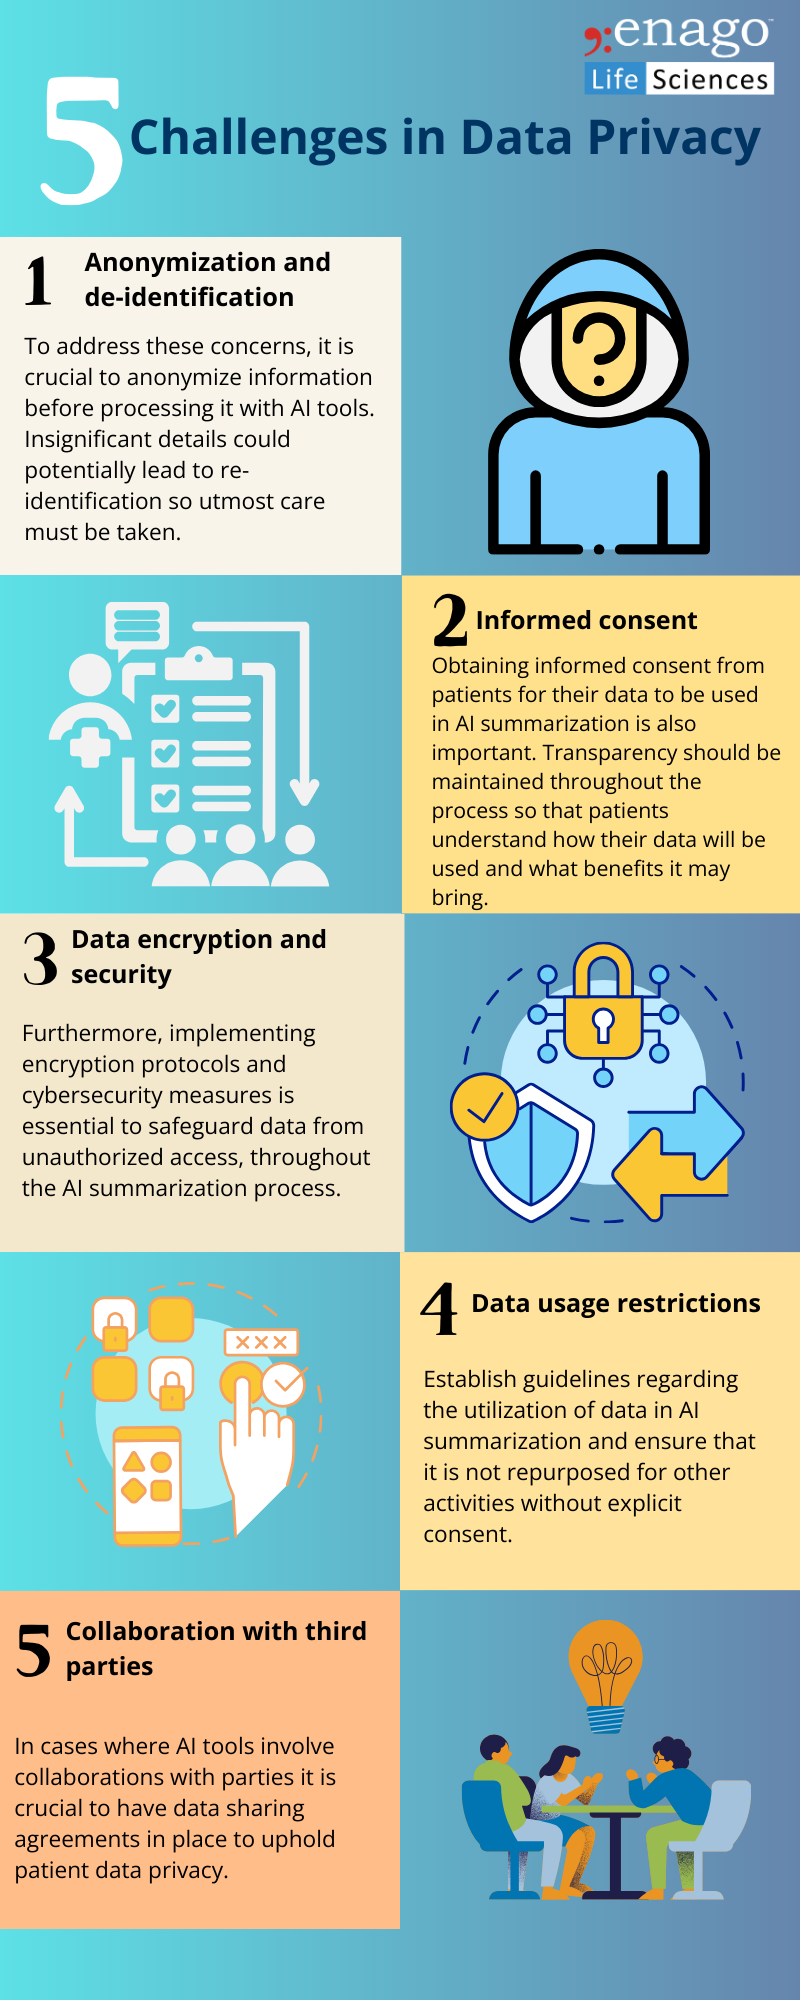 Challenges in Data Privacy